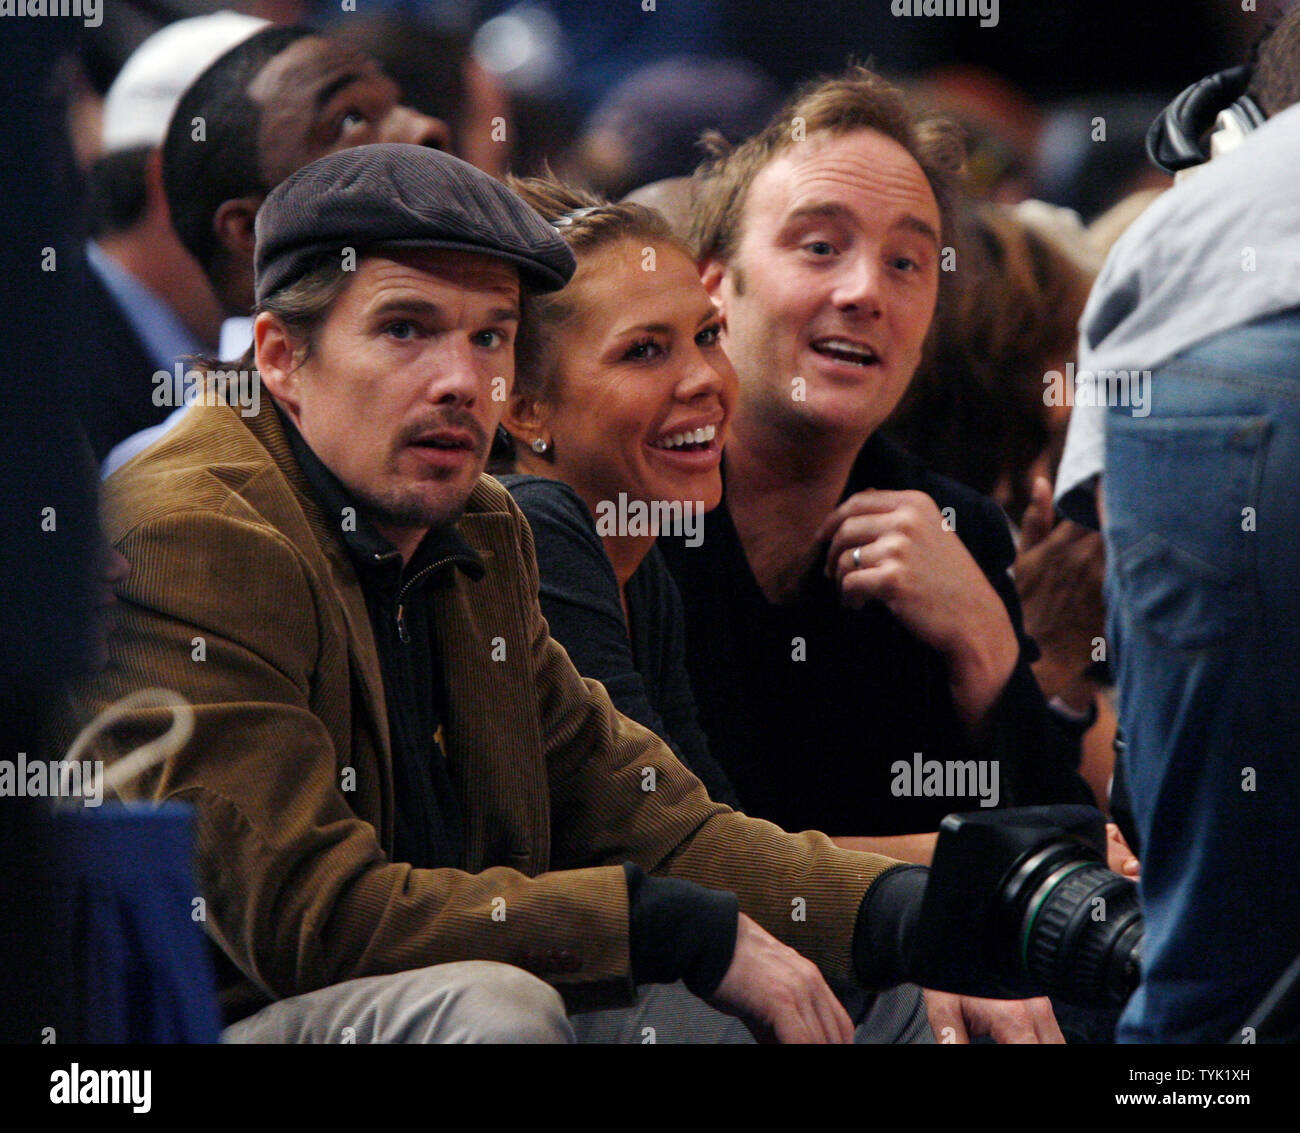 Ethan Hawke, Nikki Cox and Jay Mohr (R) watch the New Jersey Nets play the New York Knicks at Madison Square Garden in New York City on March 18, 2009. The Nets defeated the Knicks 115-89.    (UPI Photo/John Angelillo) Stock Photo